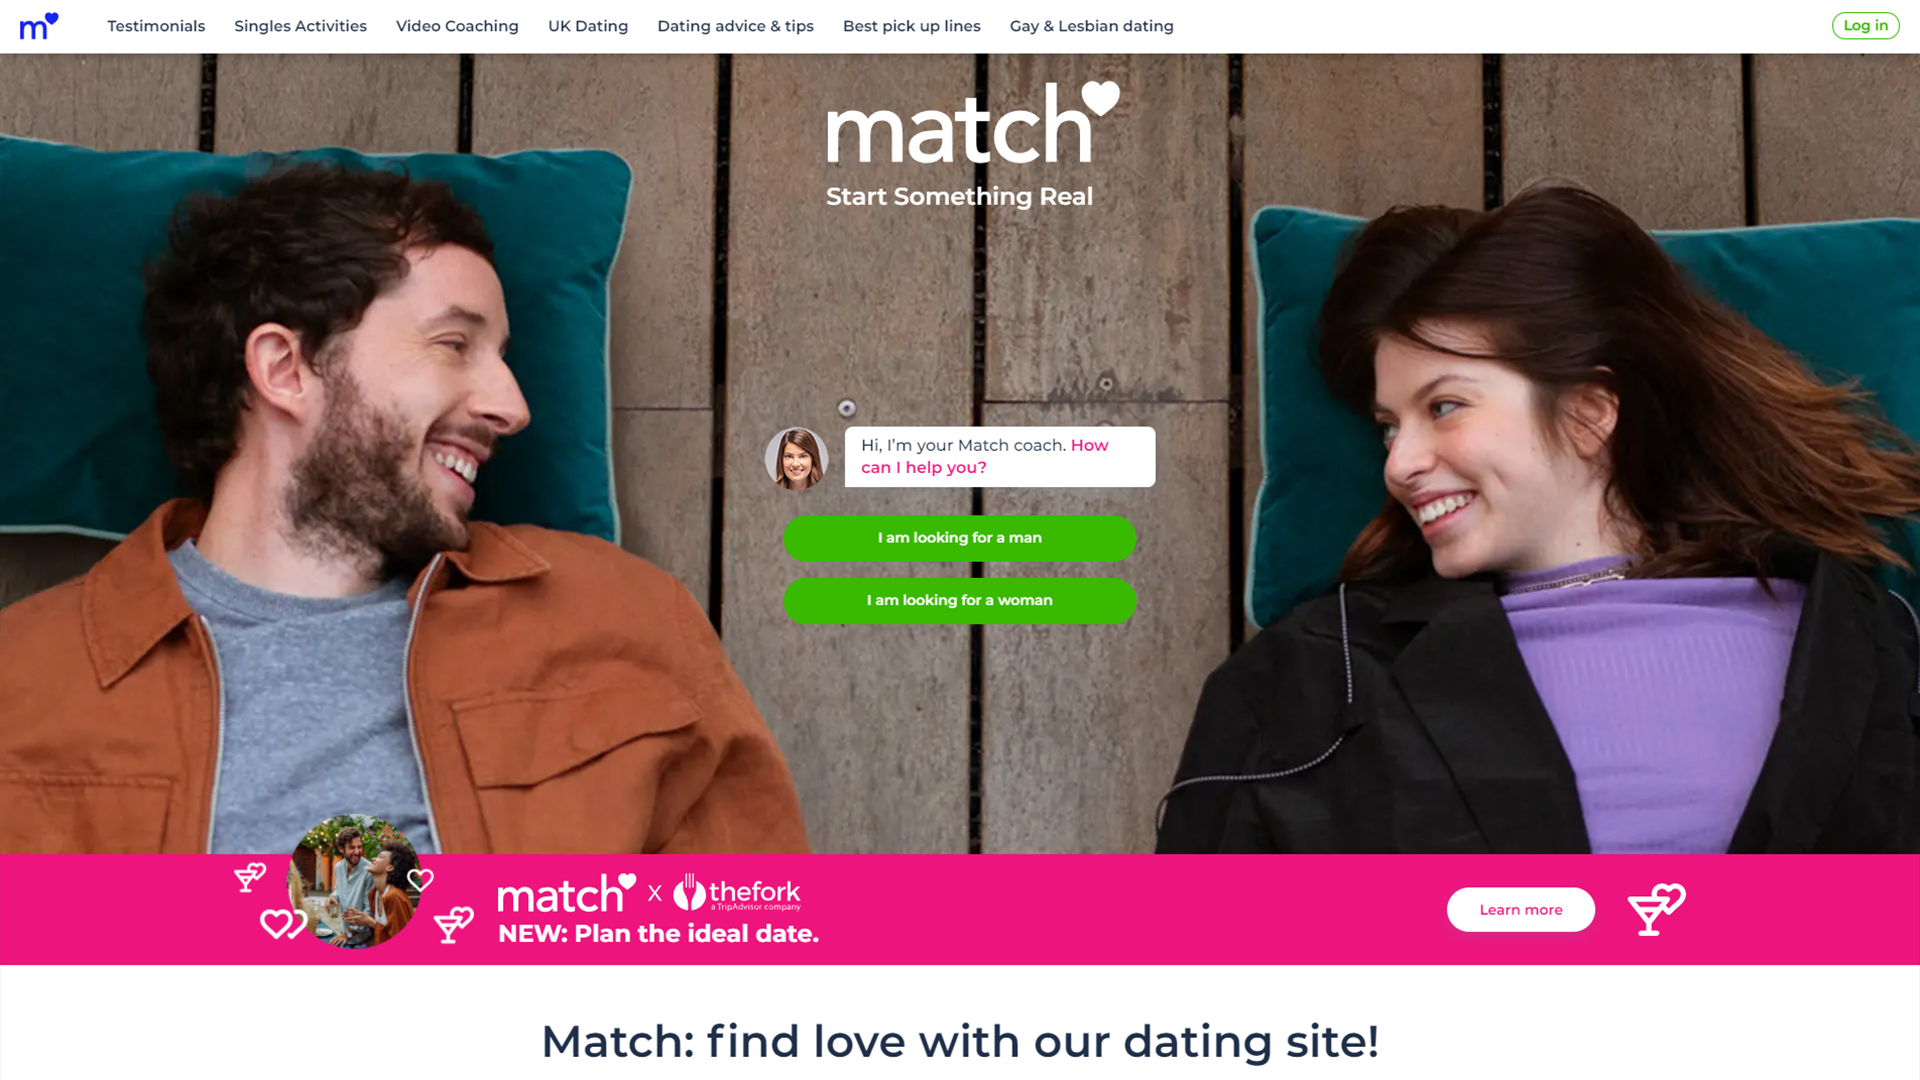 Home page of Match.com dating site.